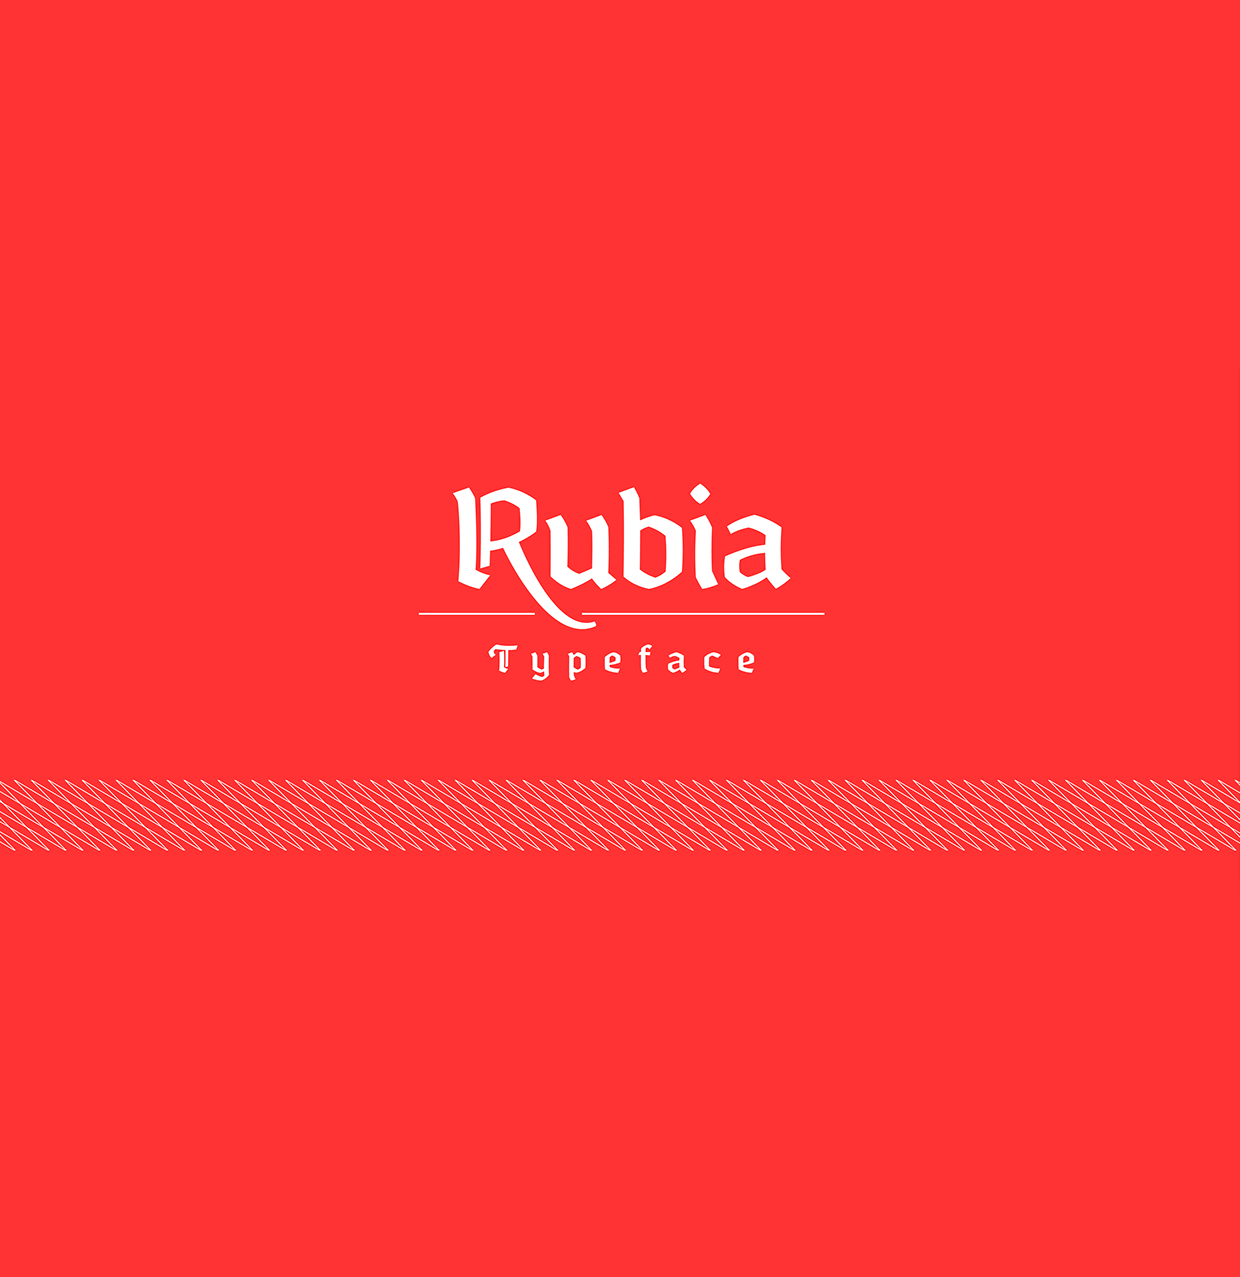 Example font Rubia #1